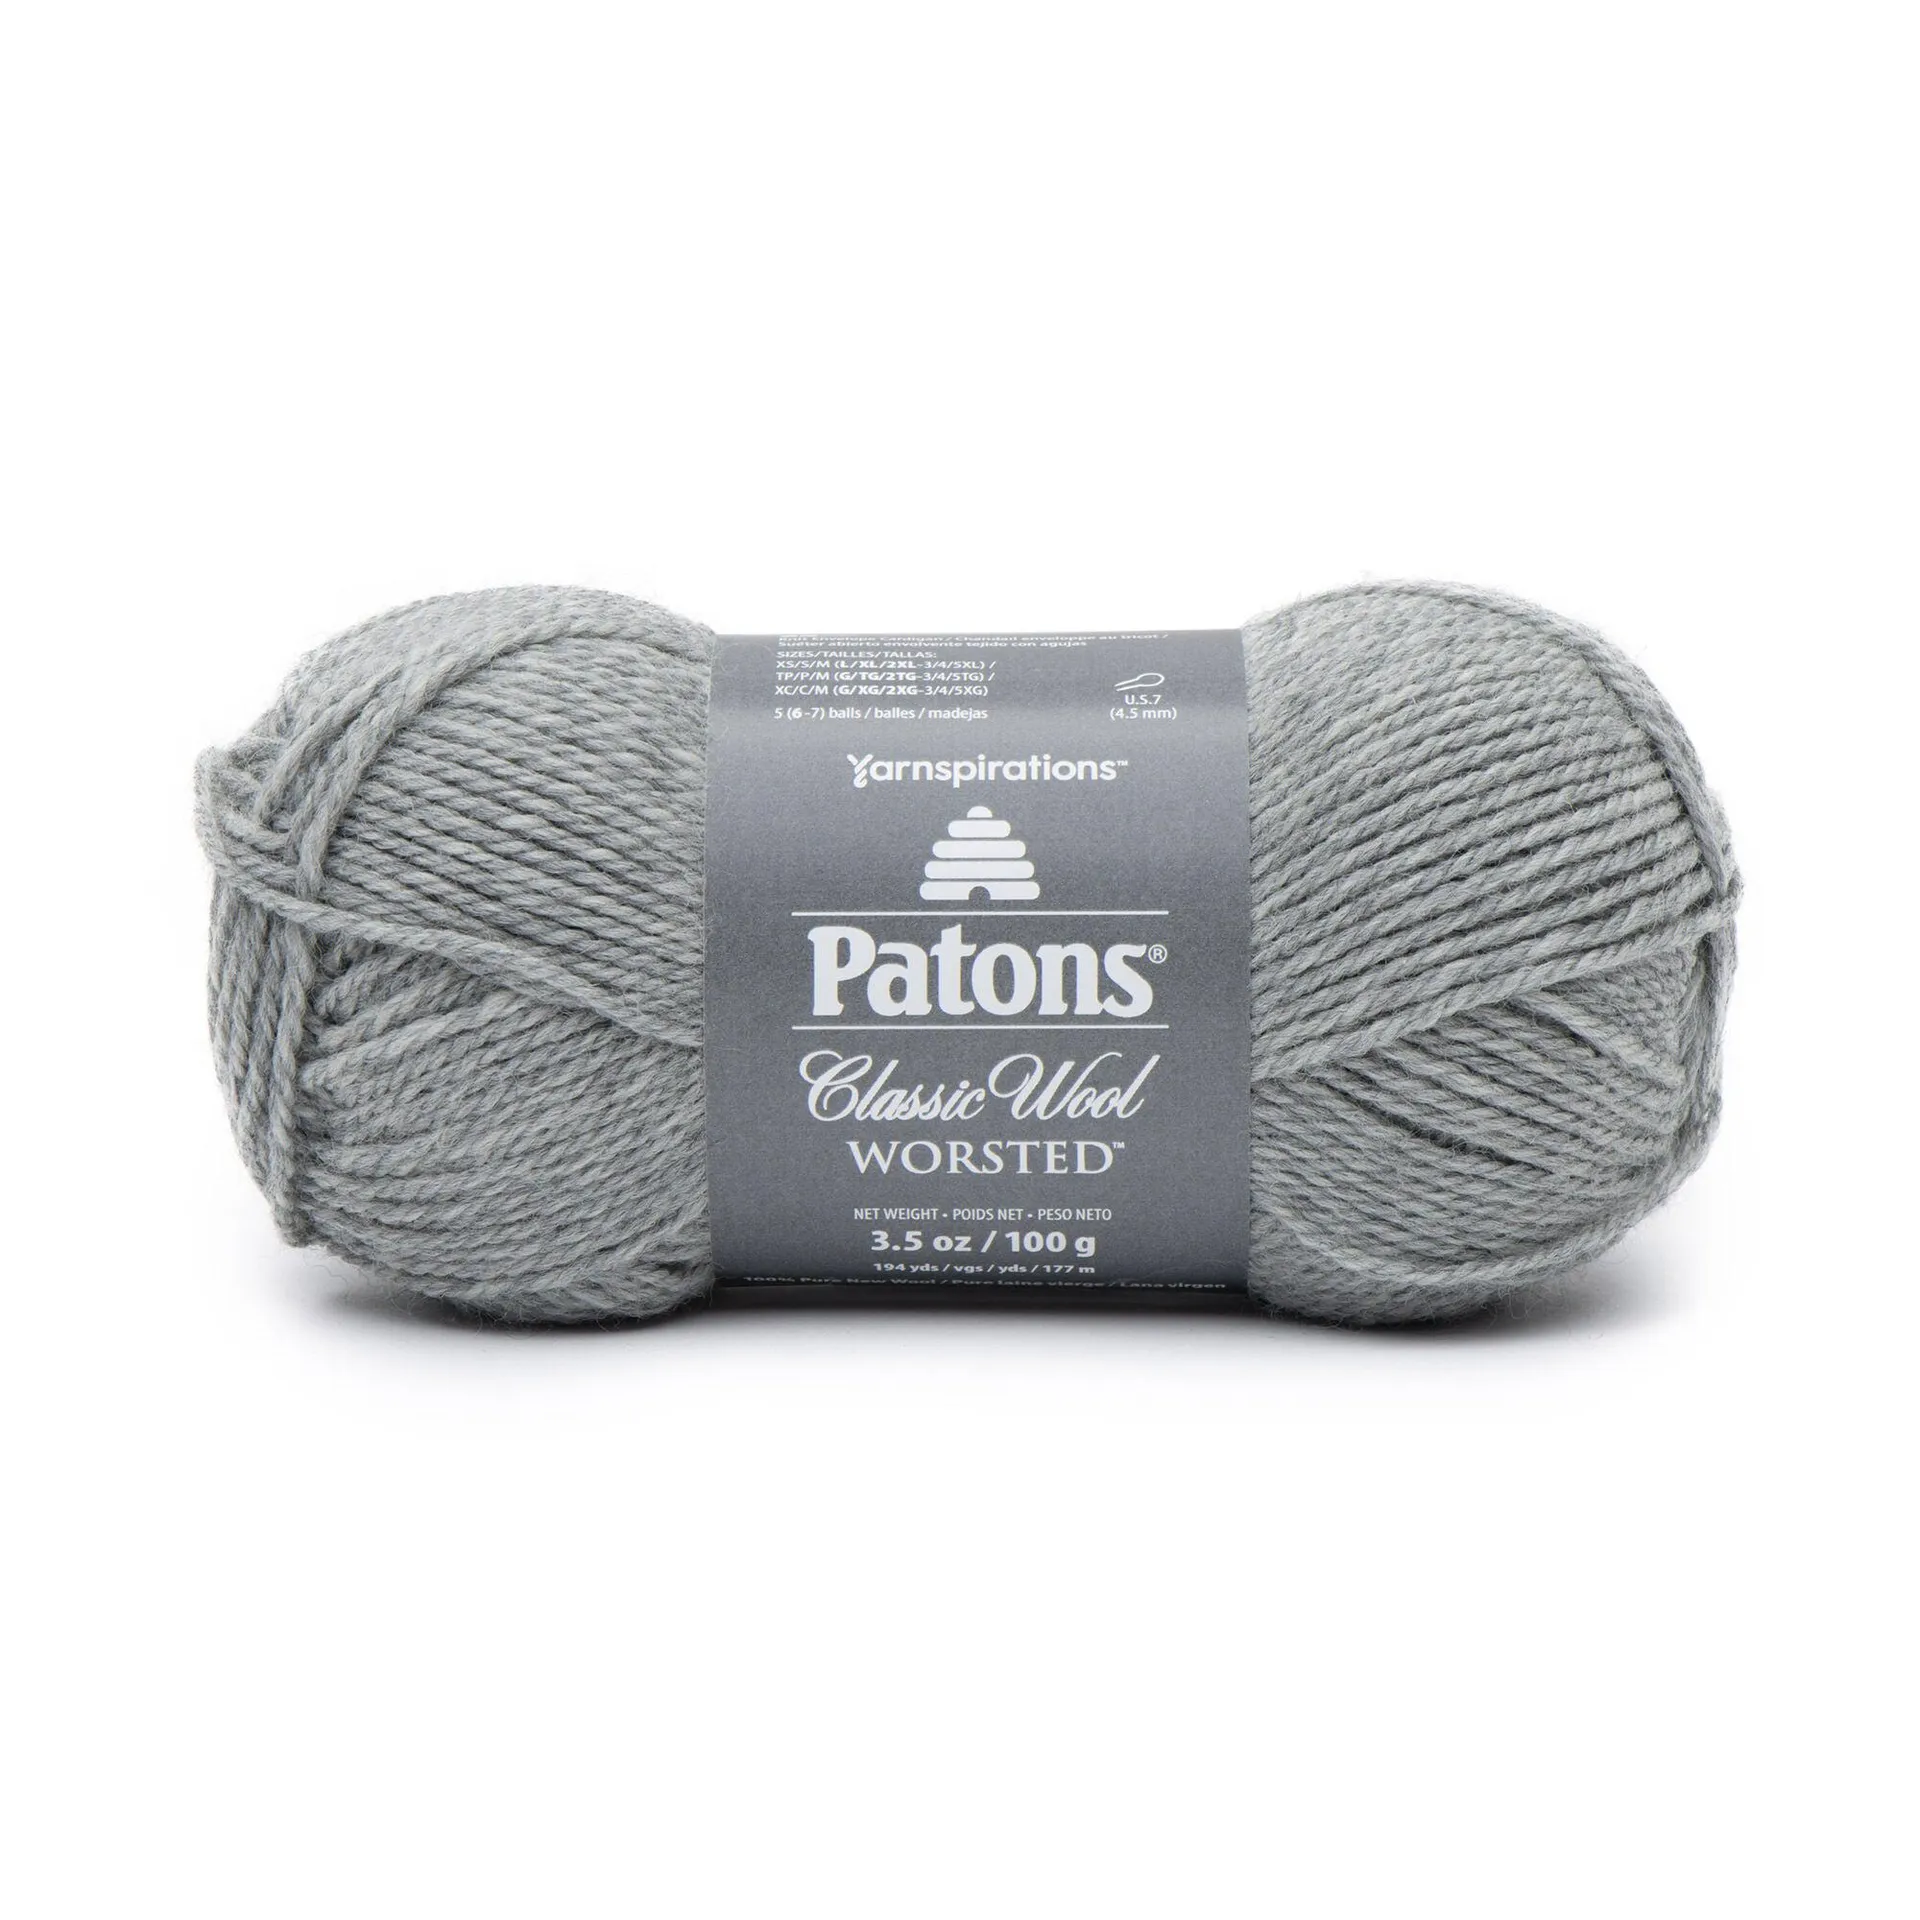 Classic Wool Worsted - 100g - Patons